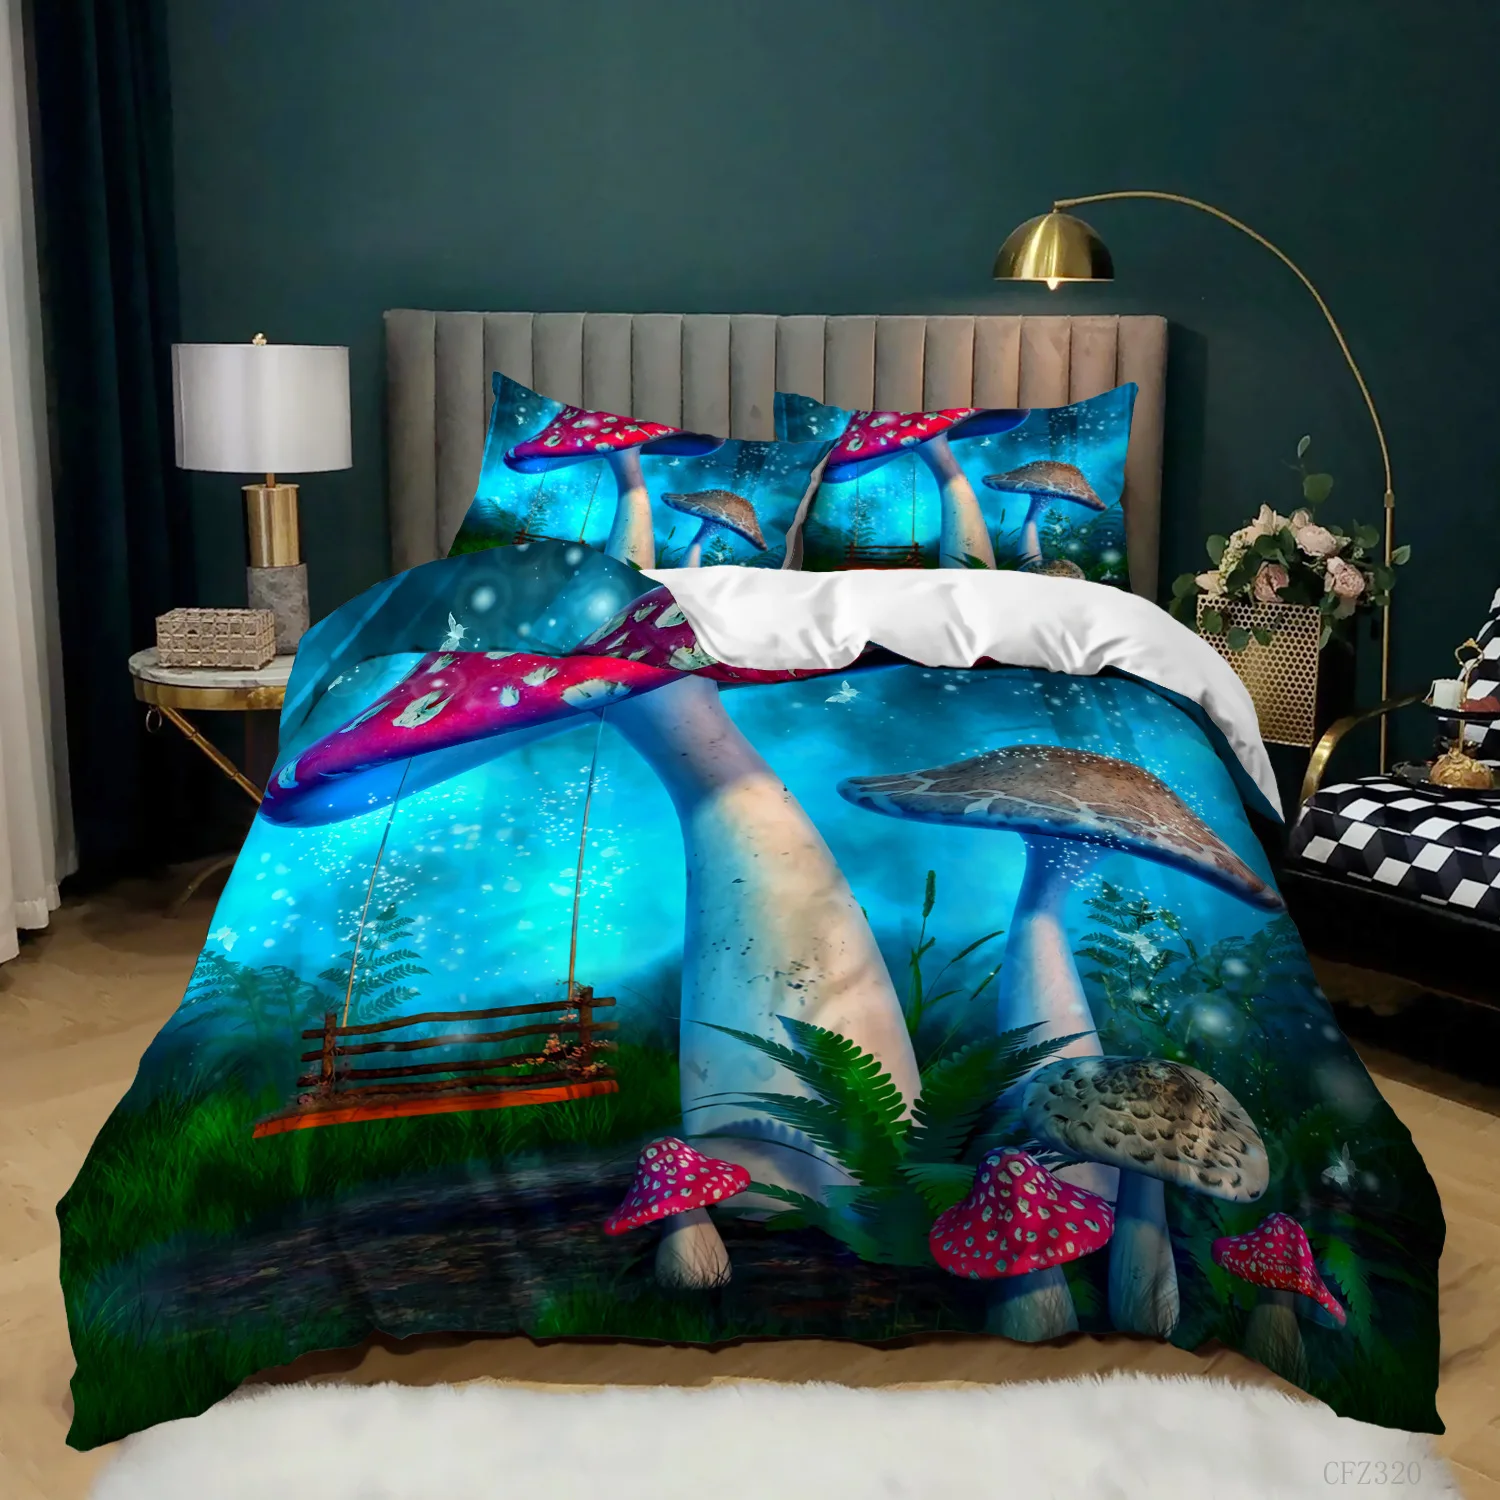 

Mushroom Duvet Cover King/Queen Size Magic Forest Colorful Cute Psychedelic Mushrooms Polyester Bedding Set for Kids Multicolor